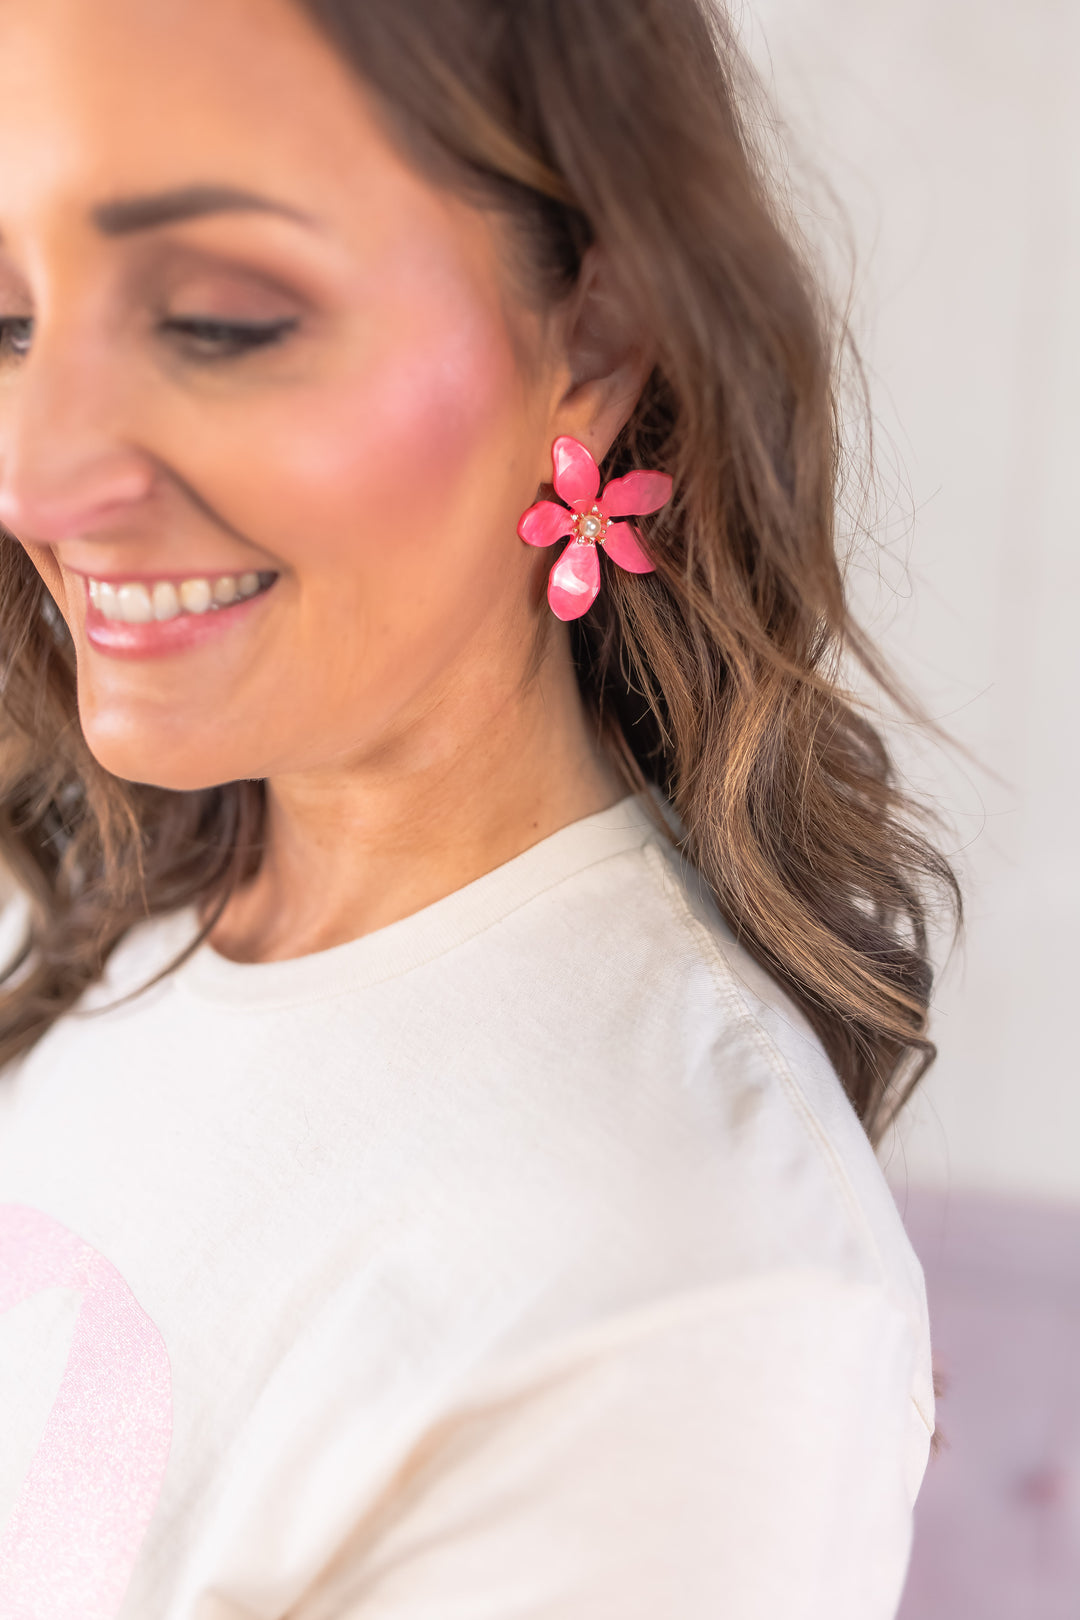 The Floral Statement Earrings